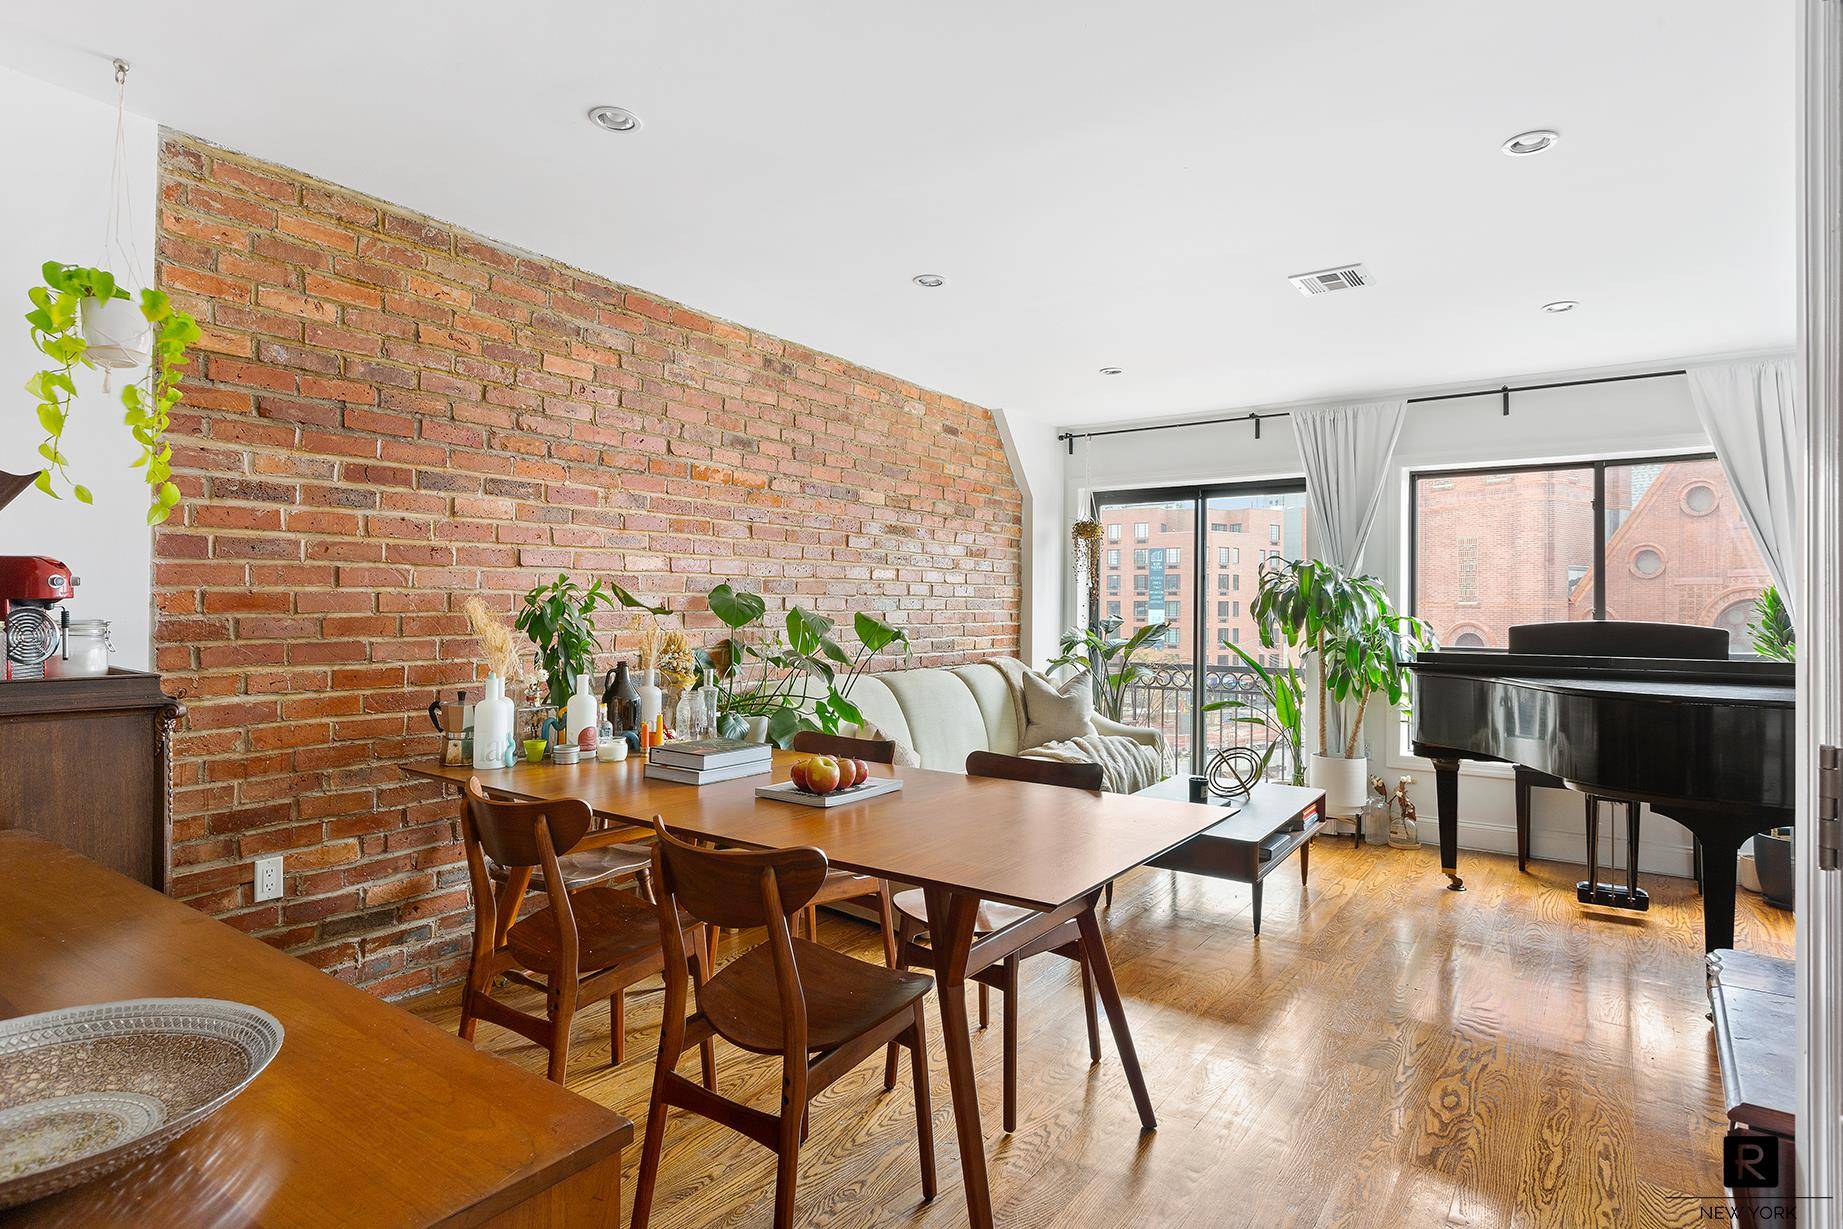 478 Grand Avenue is a lovely 22 wide, 3 family townhouse built in 2009 in Clinton Hill.